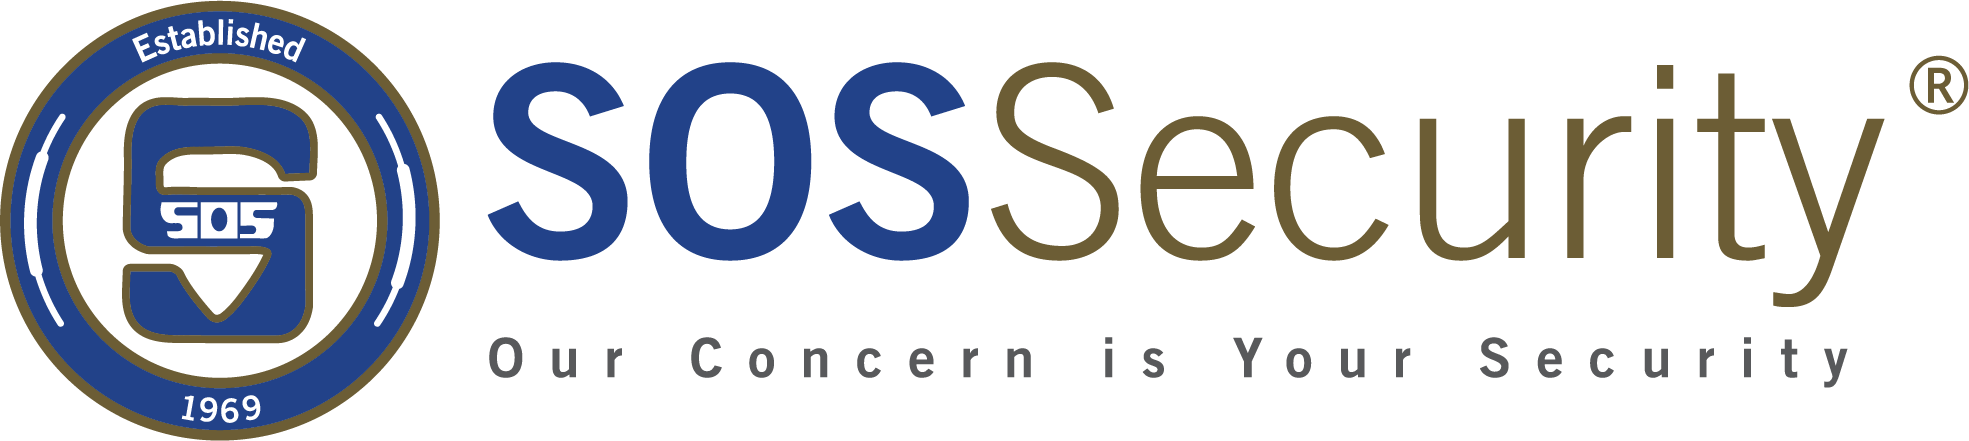 SOS Security global security services.